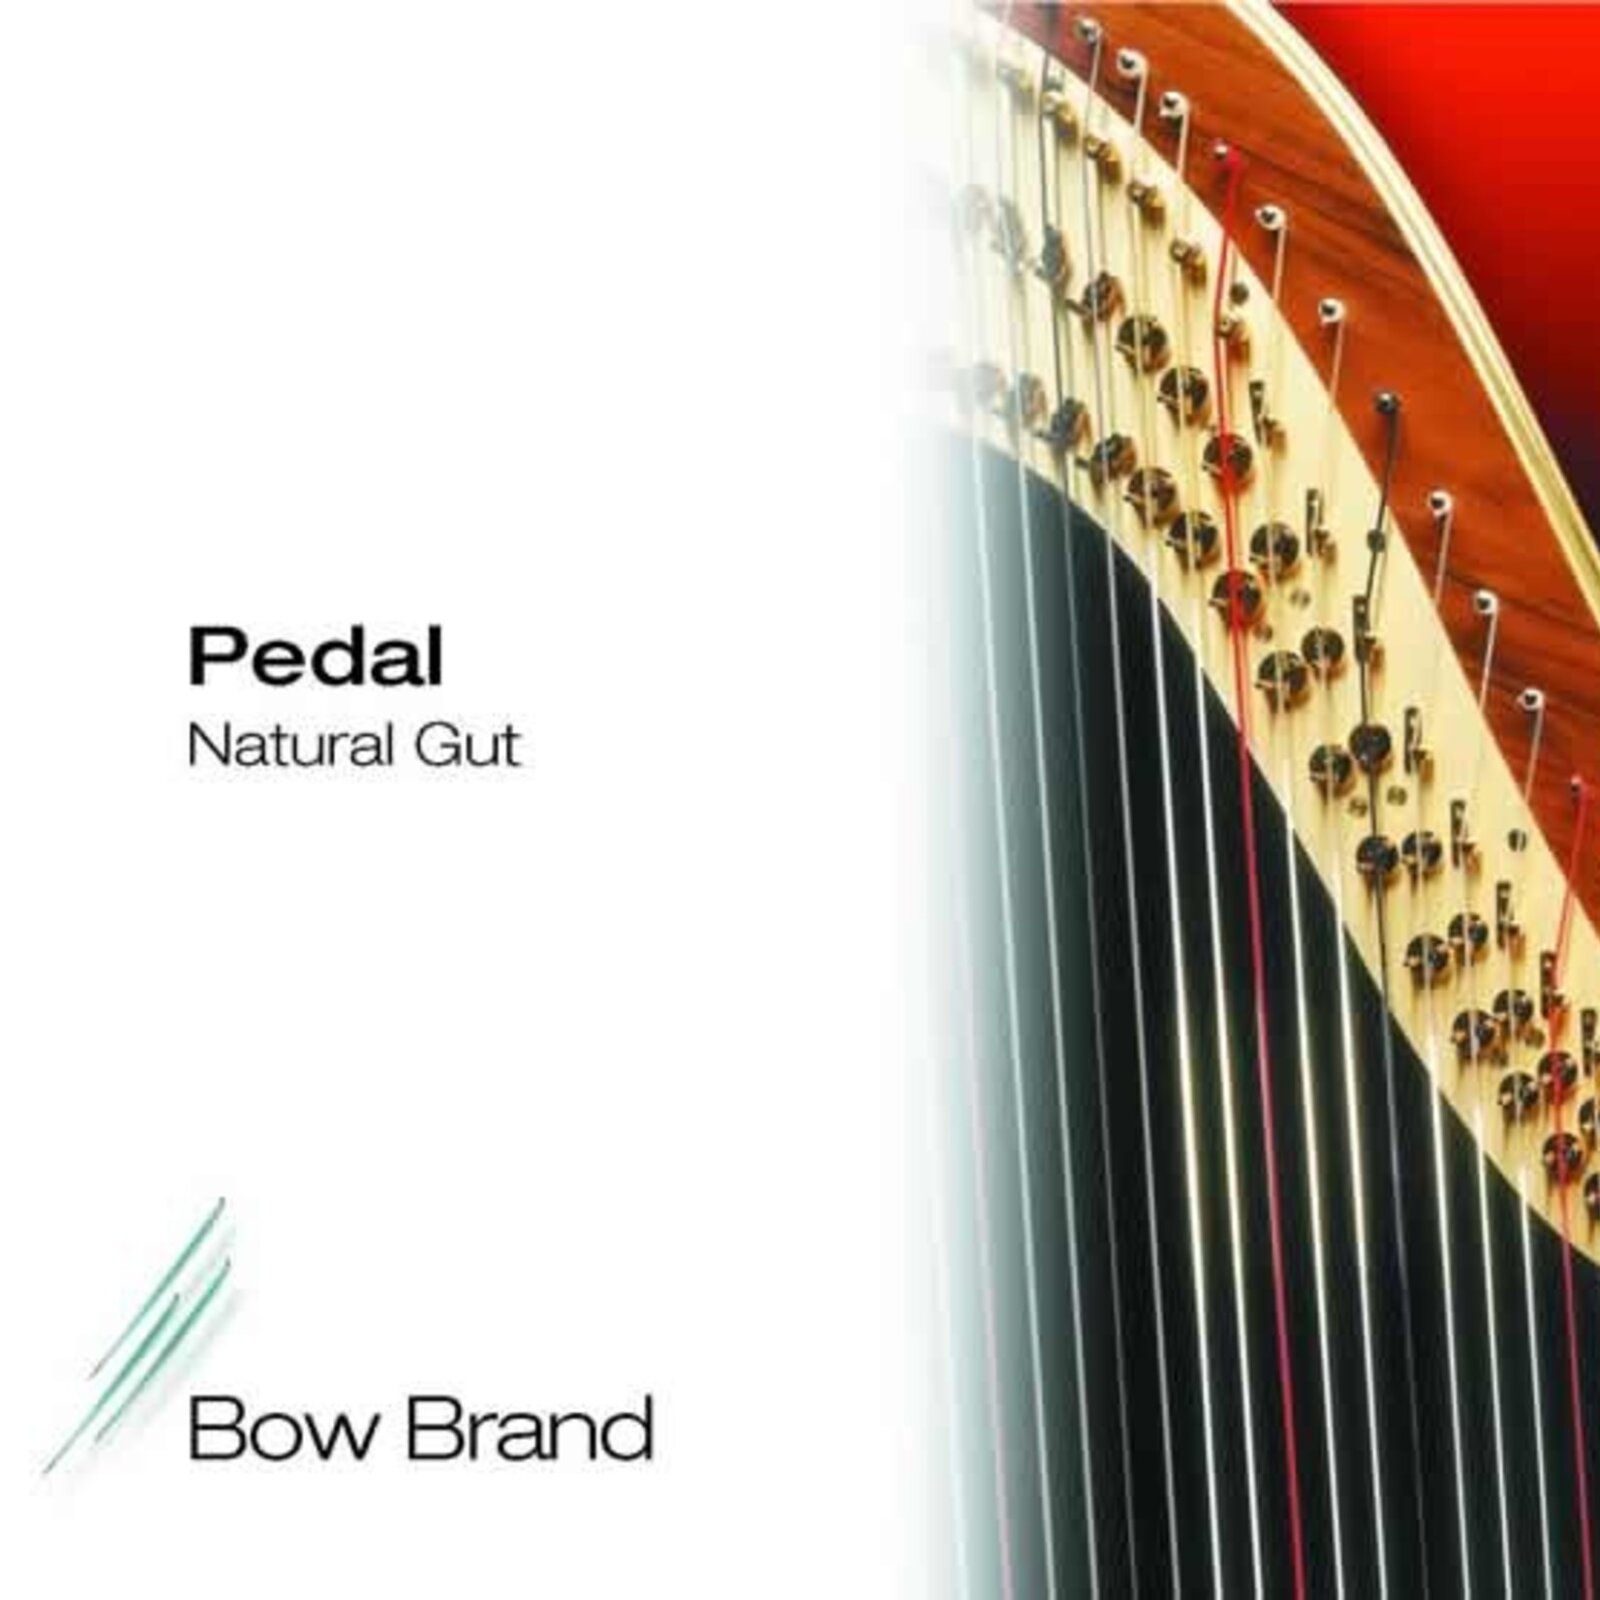 Bow Brand N 21 F 3rd octave in gut for pedal harp : photo 1